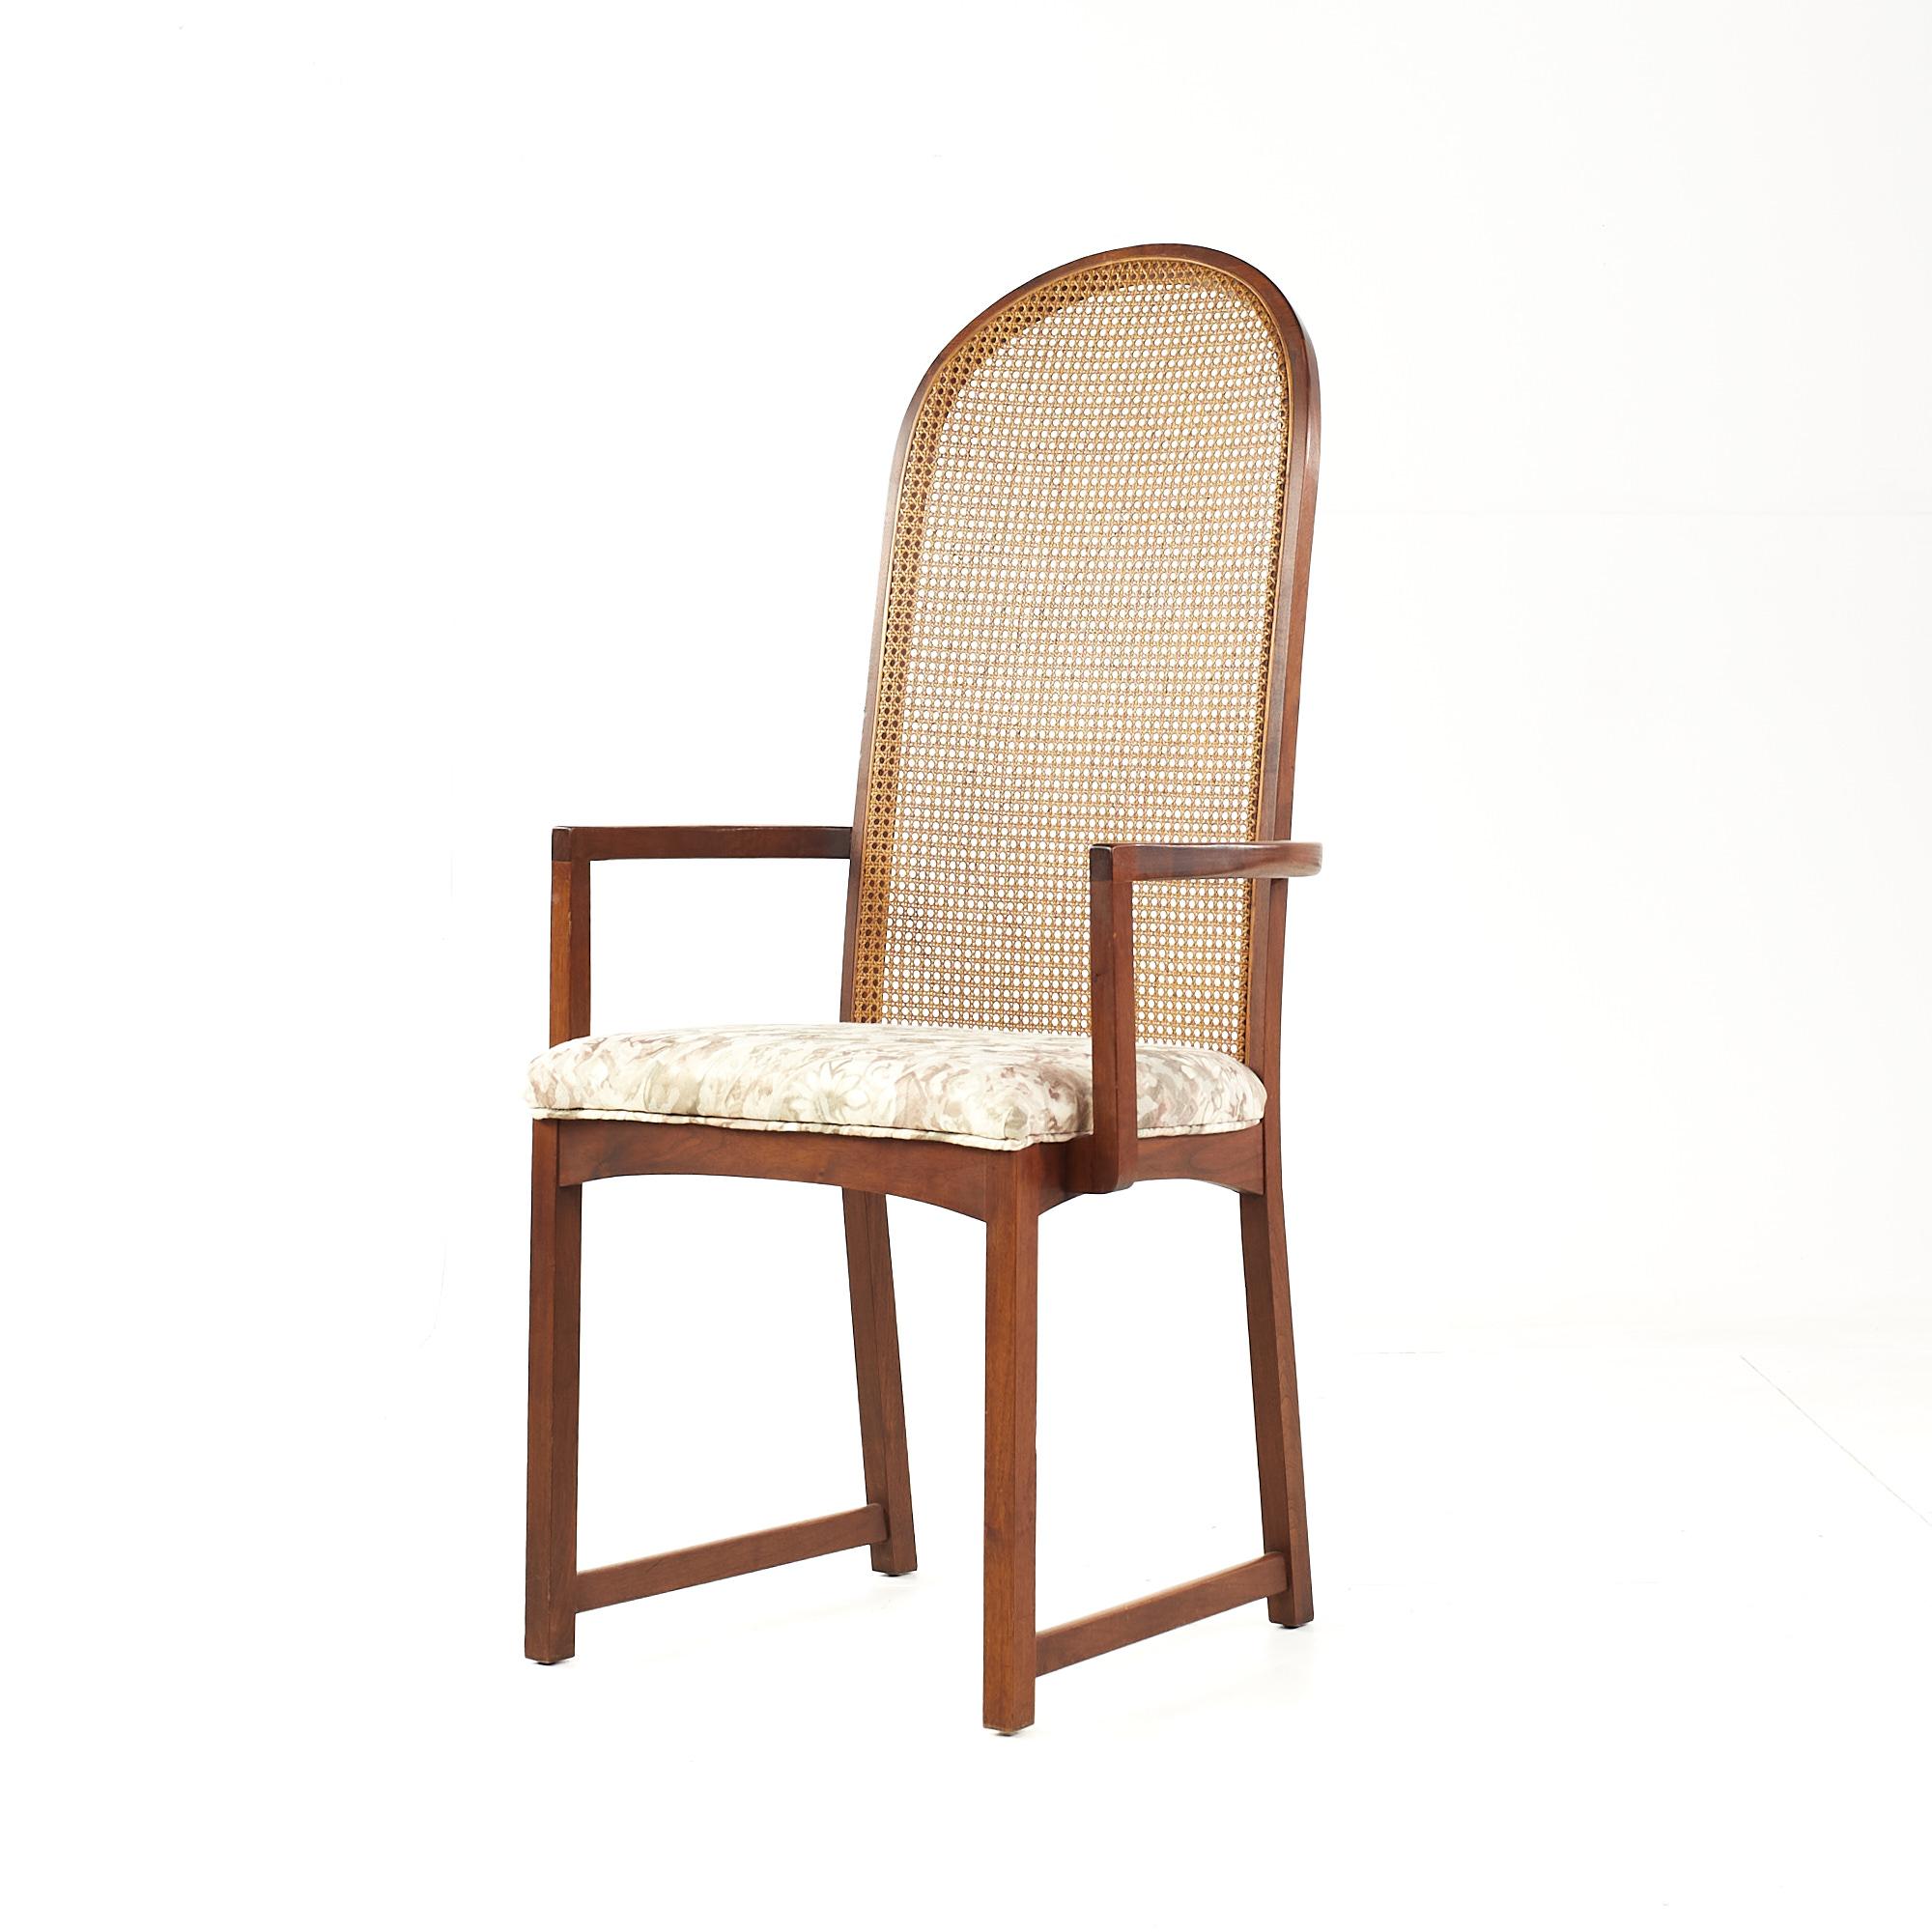 Milo Baughman for Directional MCM Walnut and Cane Back Dining Chairs - Set of 6 For Sale 6